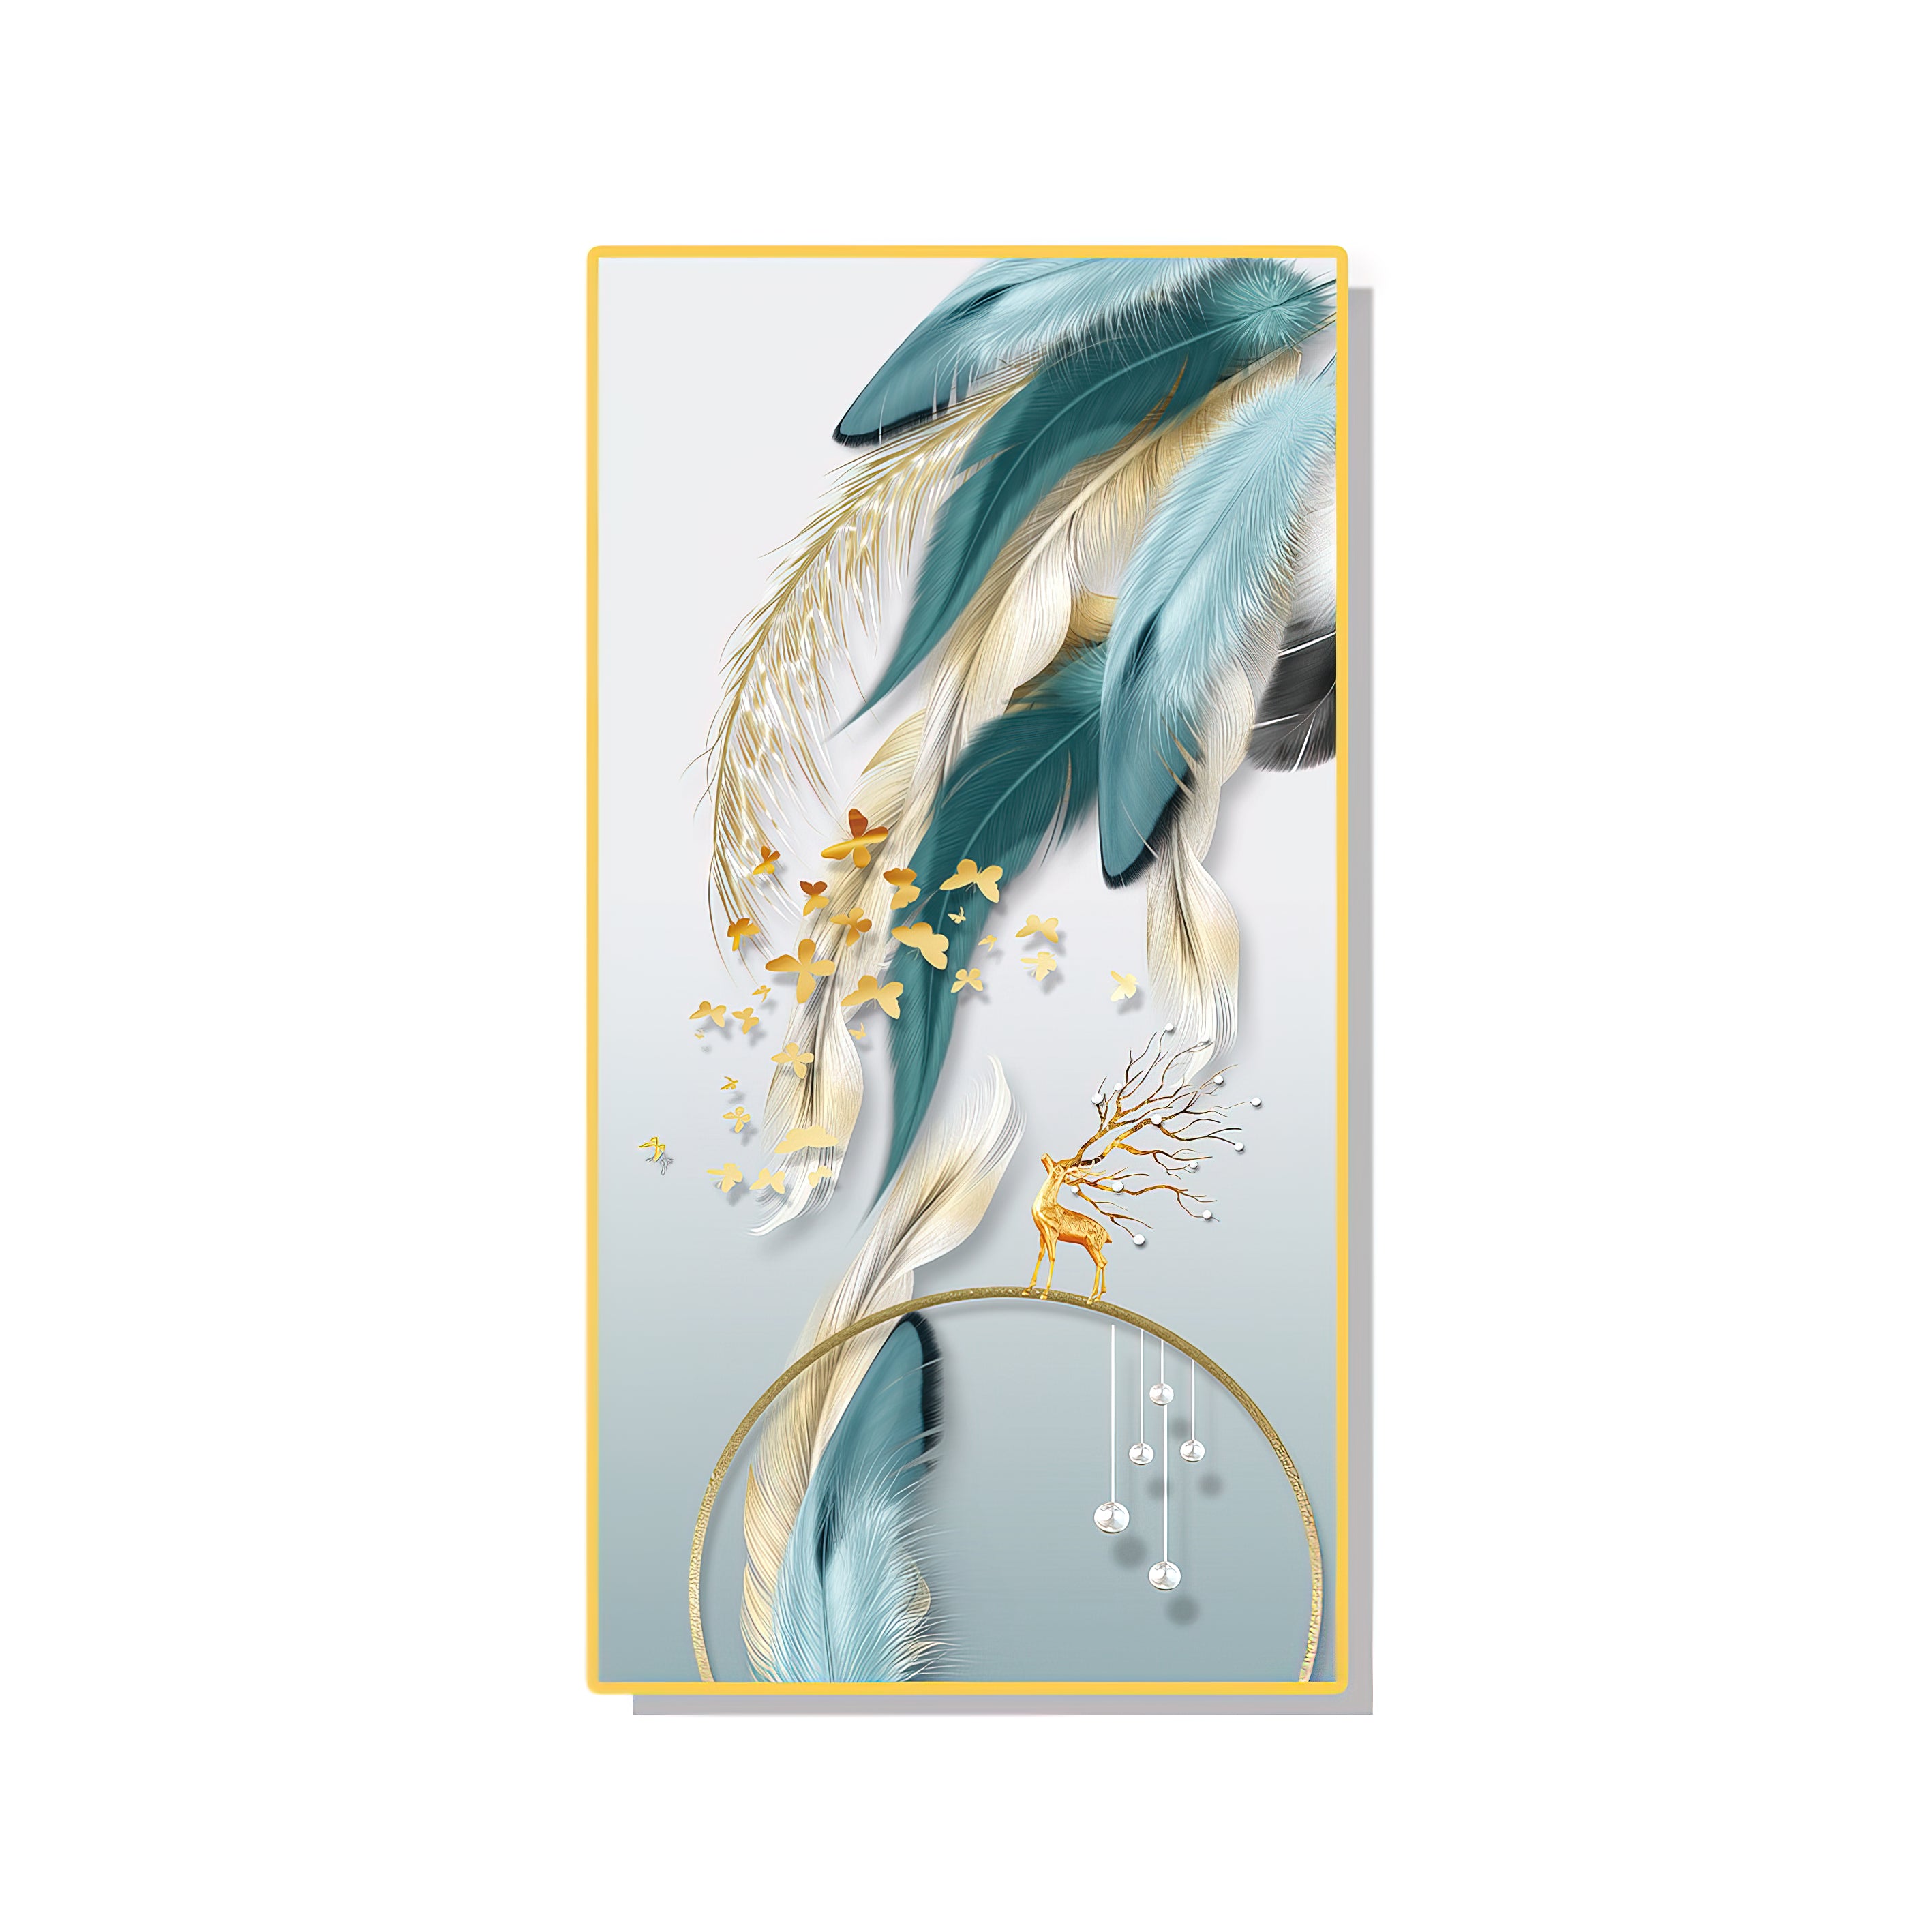 Turquoise Golden Feathers Abstract Wall Painting - 70x140 cm Artwork Home Decor crystal porcelain Framed Large wall wall art wall accents